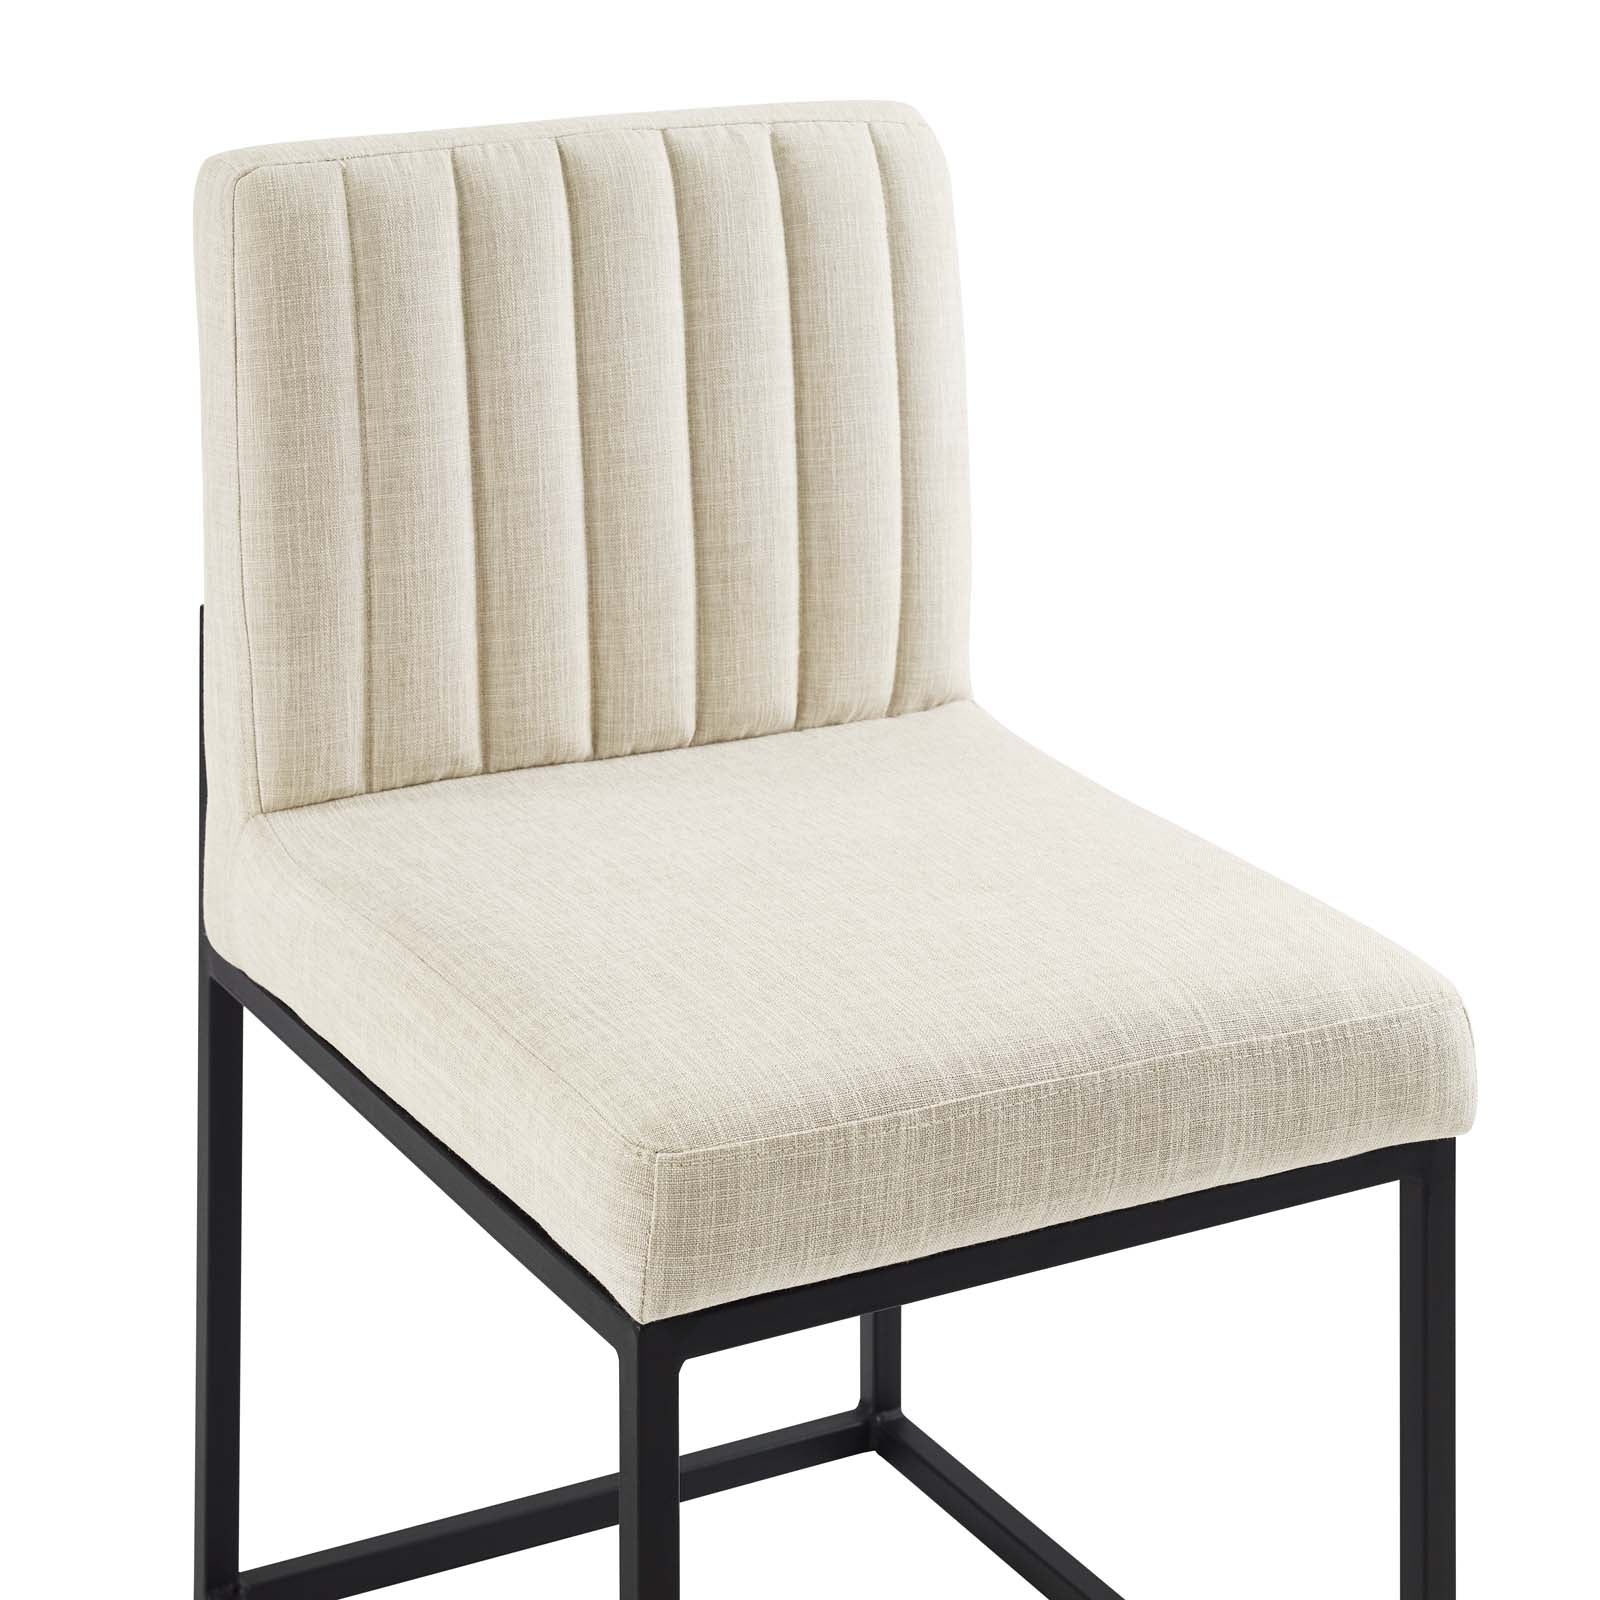 Modway Dining Chairs - Carriage Channel Tufted Sled Base Upholstered Fabric Dining Chair Black Beige